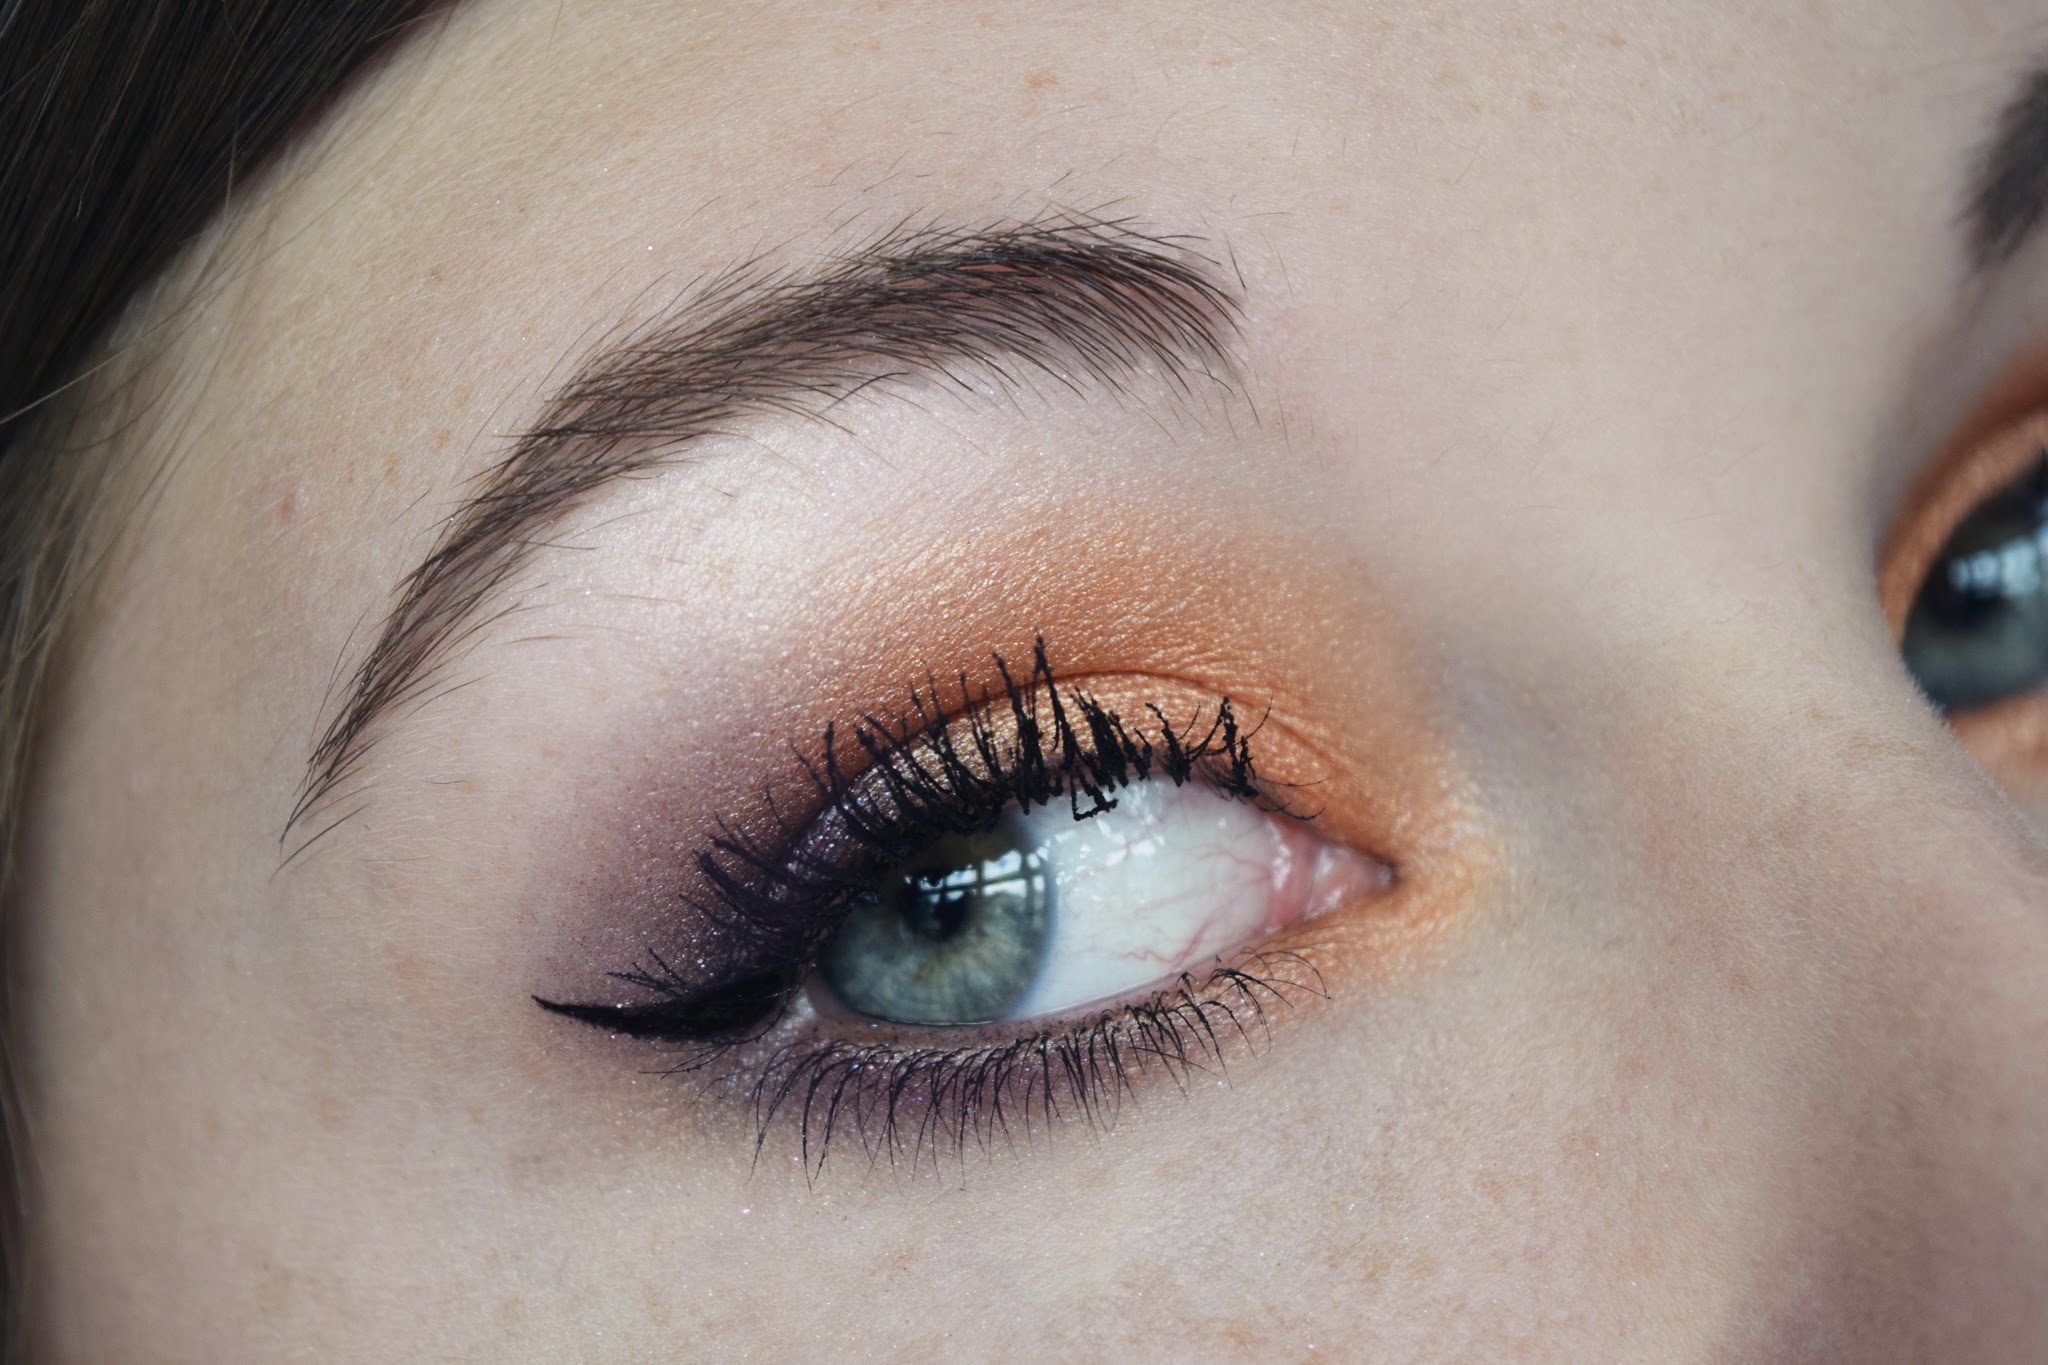 a close up shot of an eye with vivid orange and purple eyeshadow.